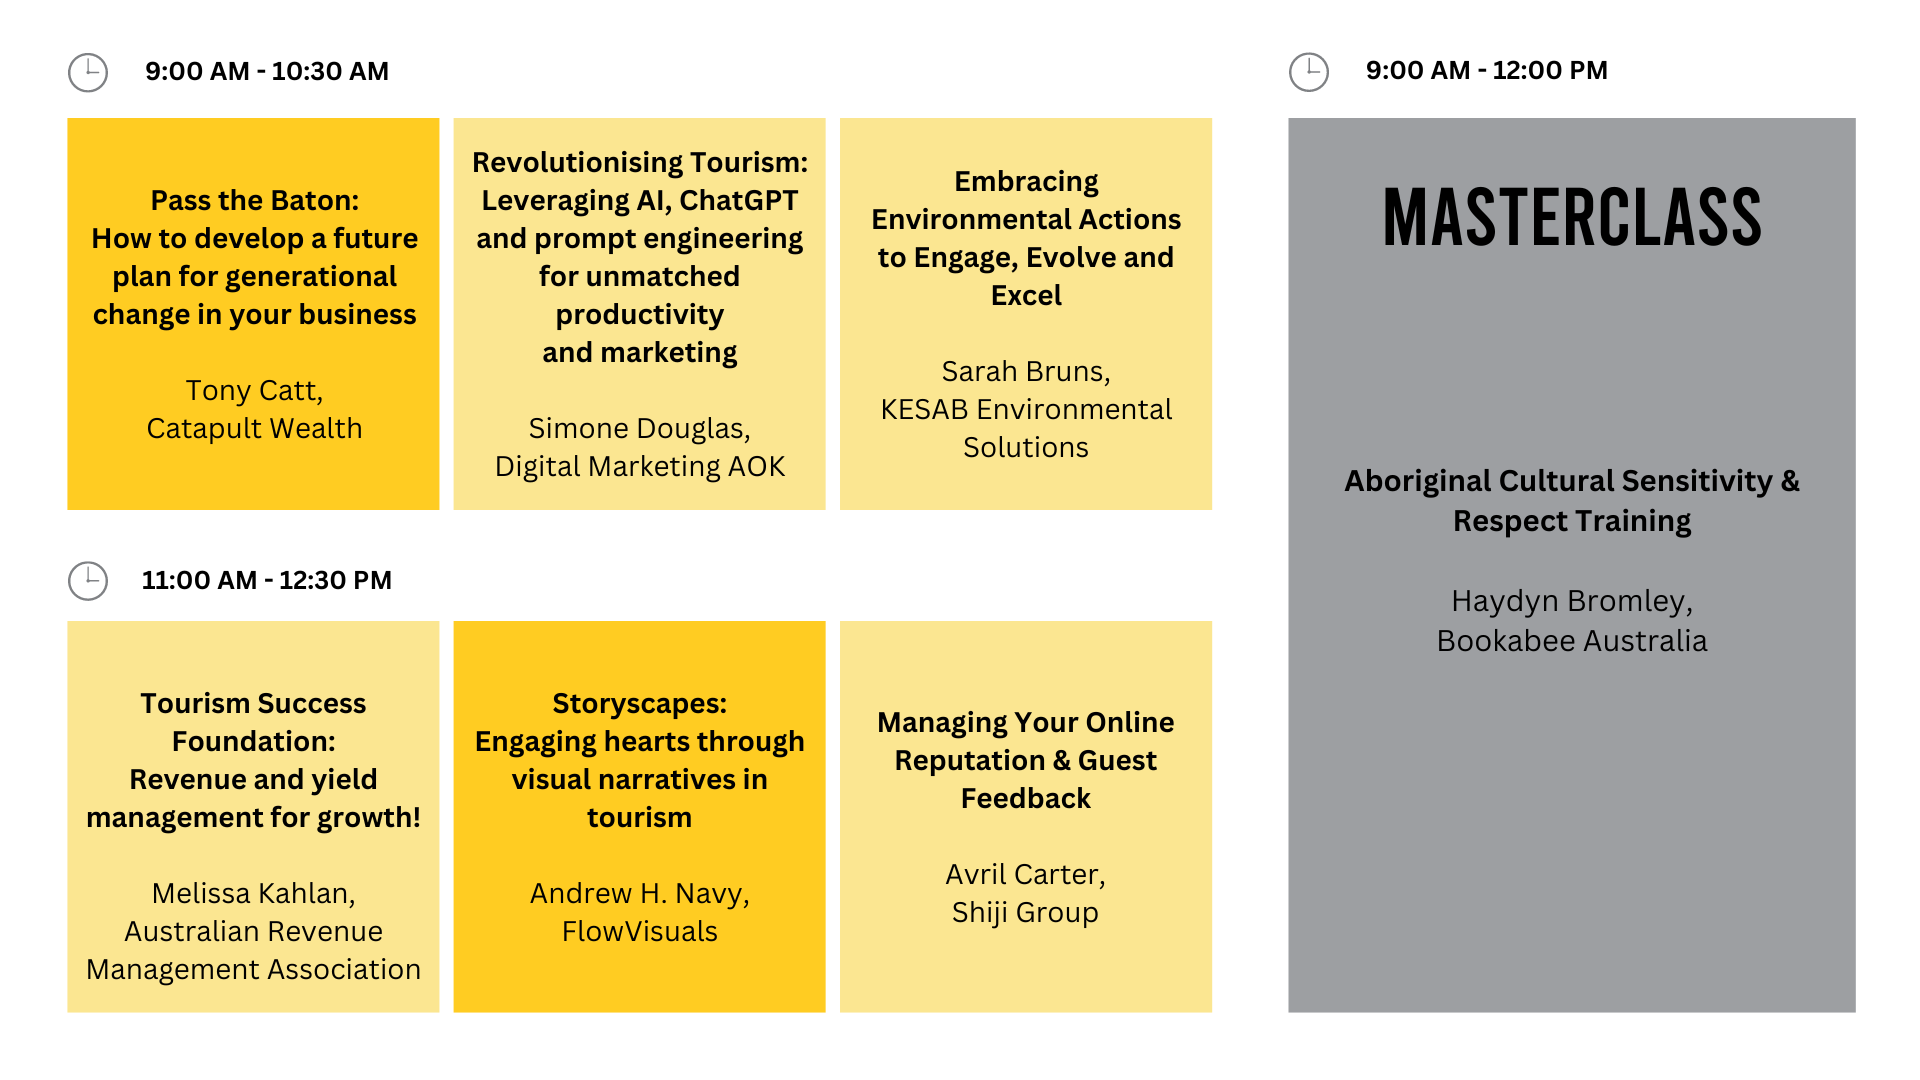 A visual overview of the workshops and masterclass' topics along with their respective speaker in the morning session